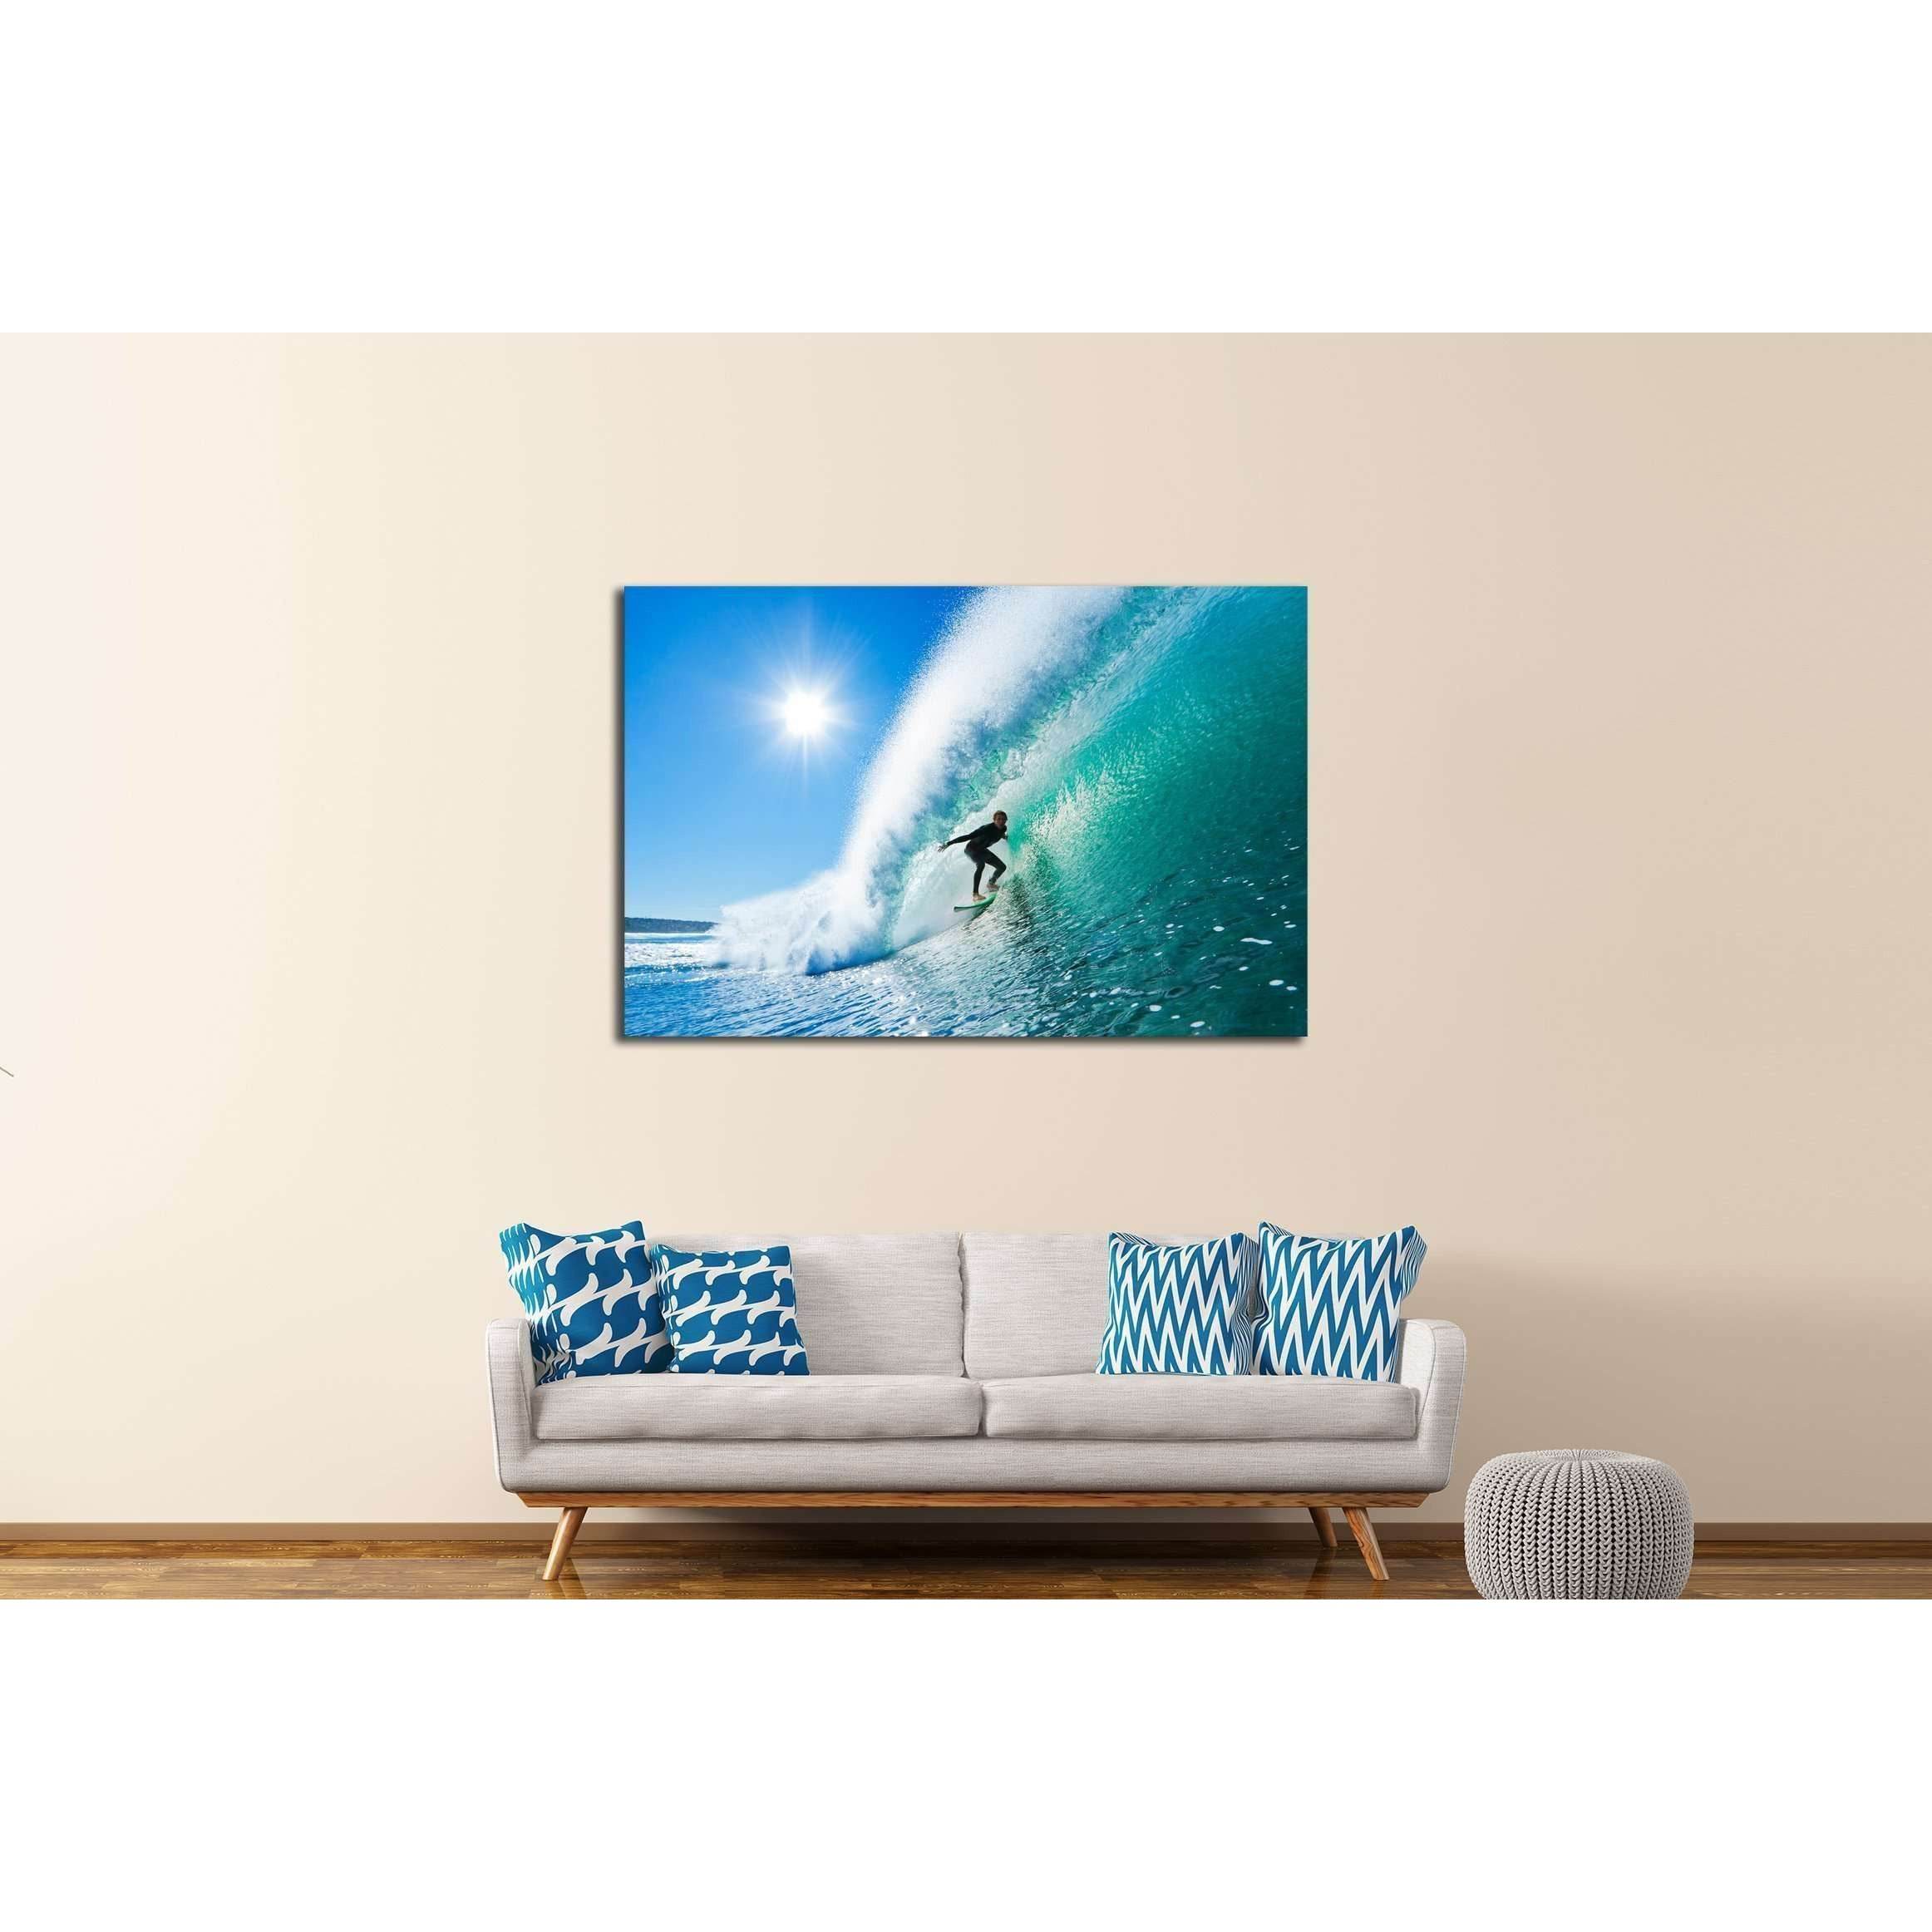 Dynamic Surfer Wave Triptych Canvas for Beach House DecorThis triptych canvas print captures a surfer skillfully navigating a towering wave, with the sun shining brightly in a clear blue sky. The dynamic composition and vivid colors convey the excitement